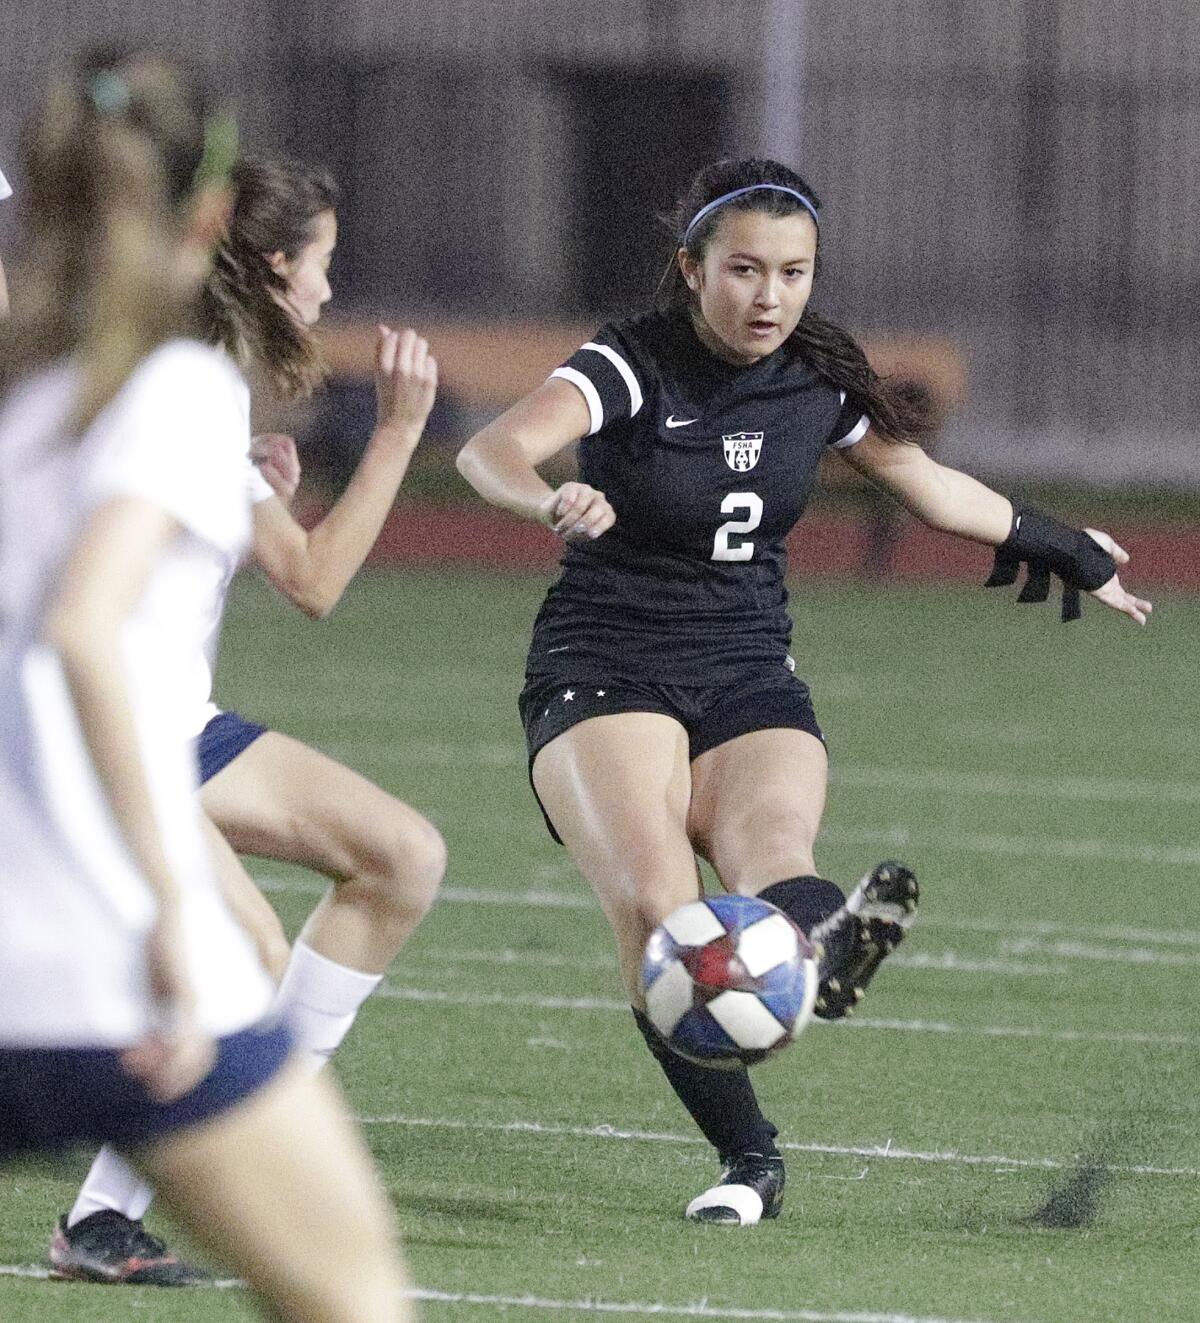 Flintridge Sacred Heart's Madeleine Hara clears the ball just as Sherman Oaks Notre Dame's Maya Naor gets to her in a Mission League girls' soccer game at Occidental College in Los Angeles on Wednesday, January 8, 2020.